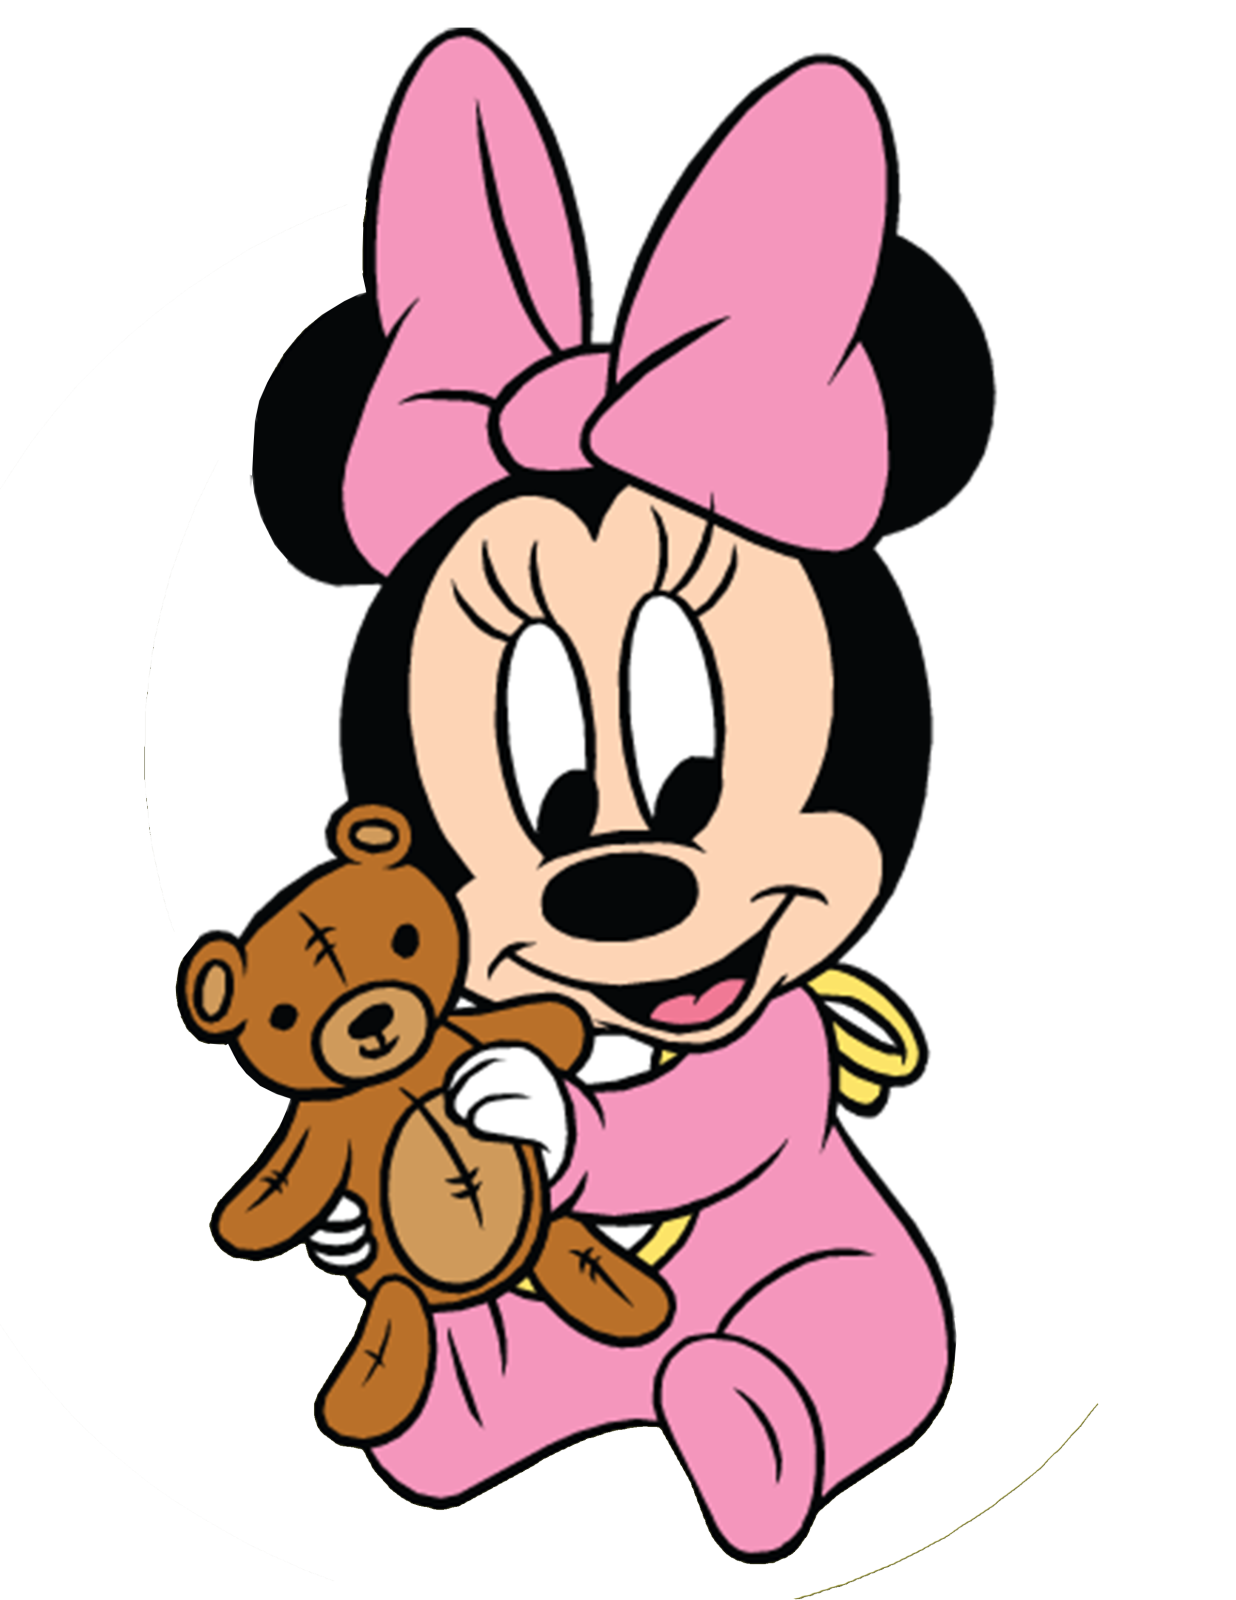 Baby Minnie Mouse Png